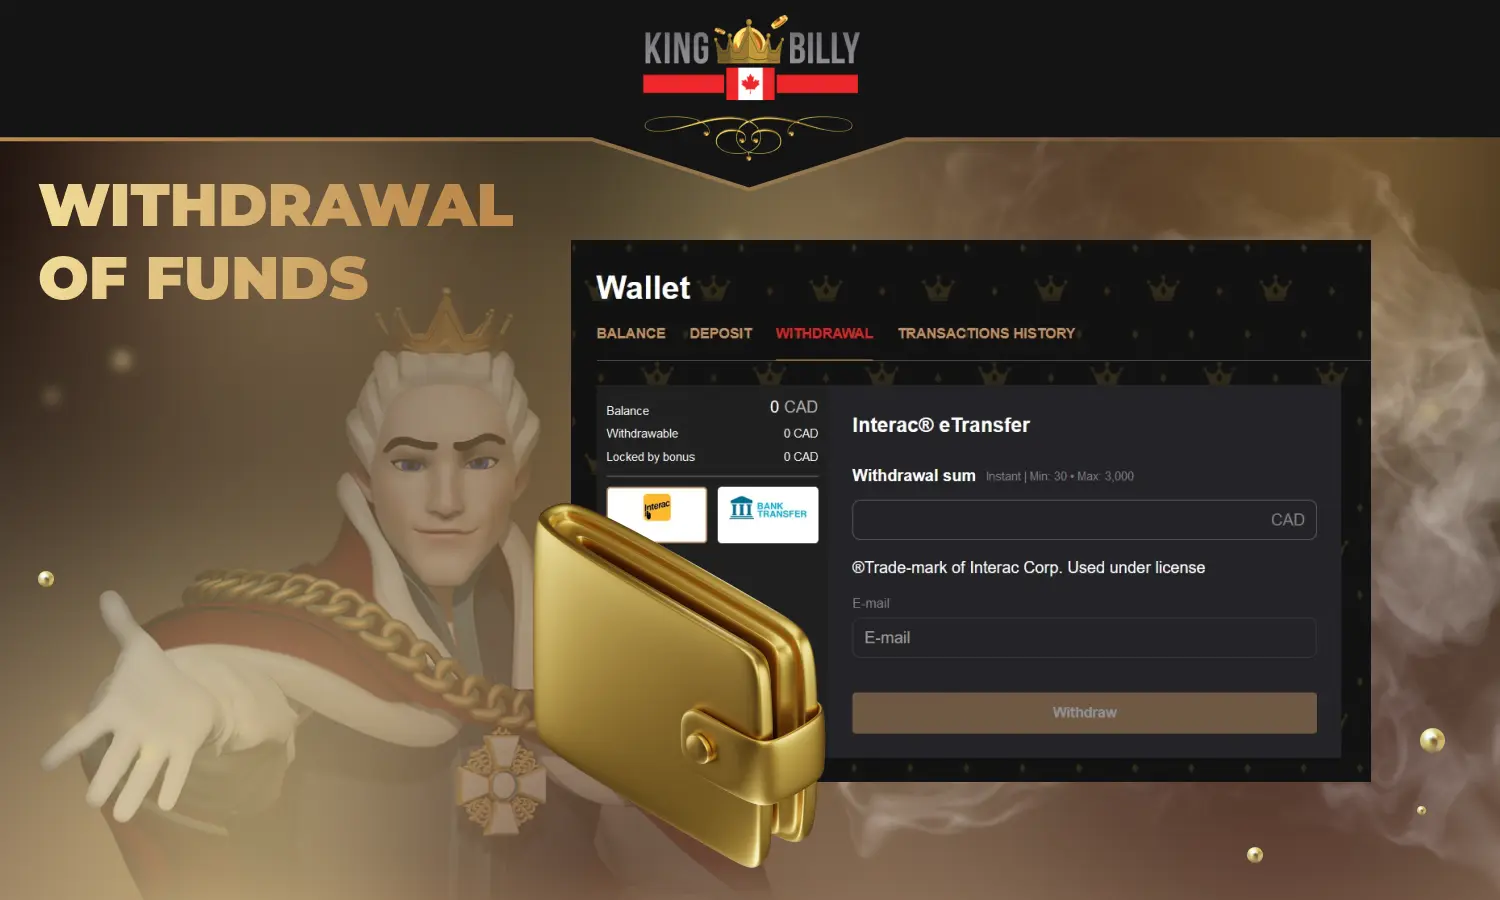 How to withdraw funds from the King Billy website for Canadian users